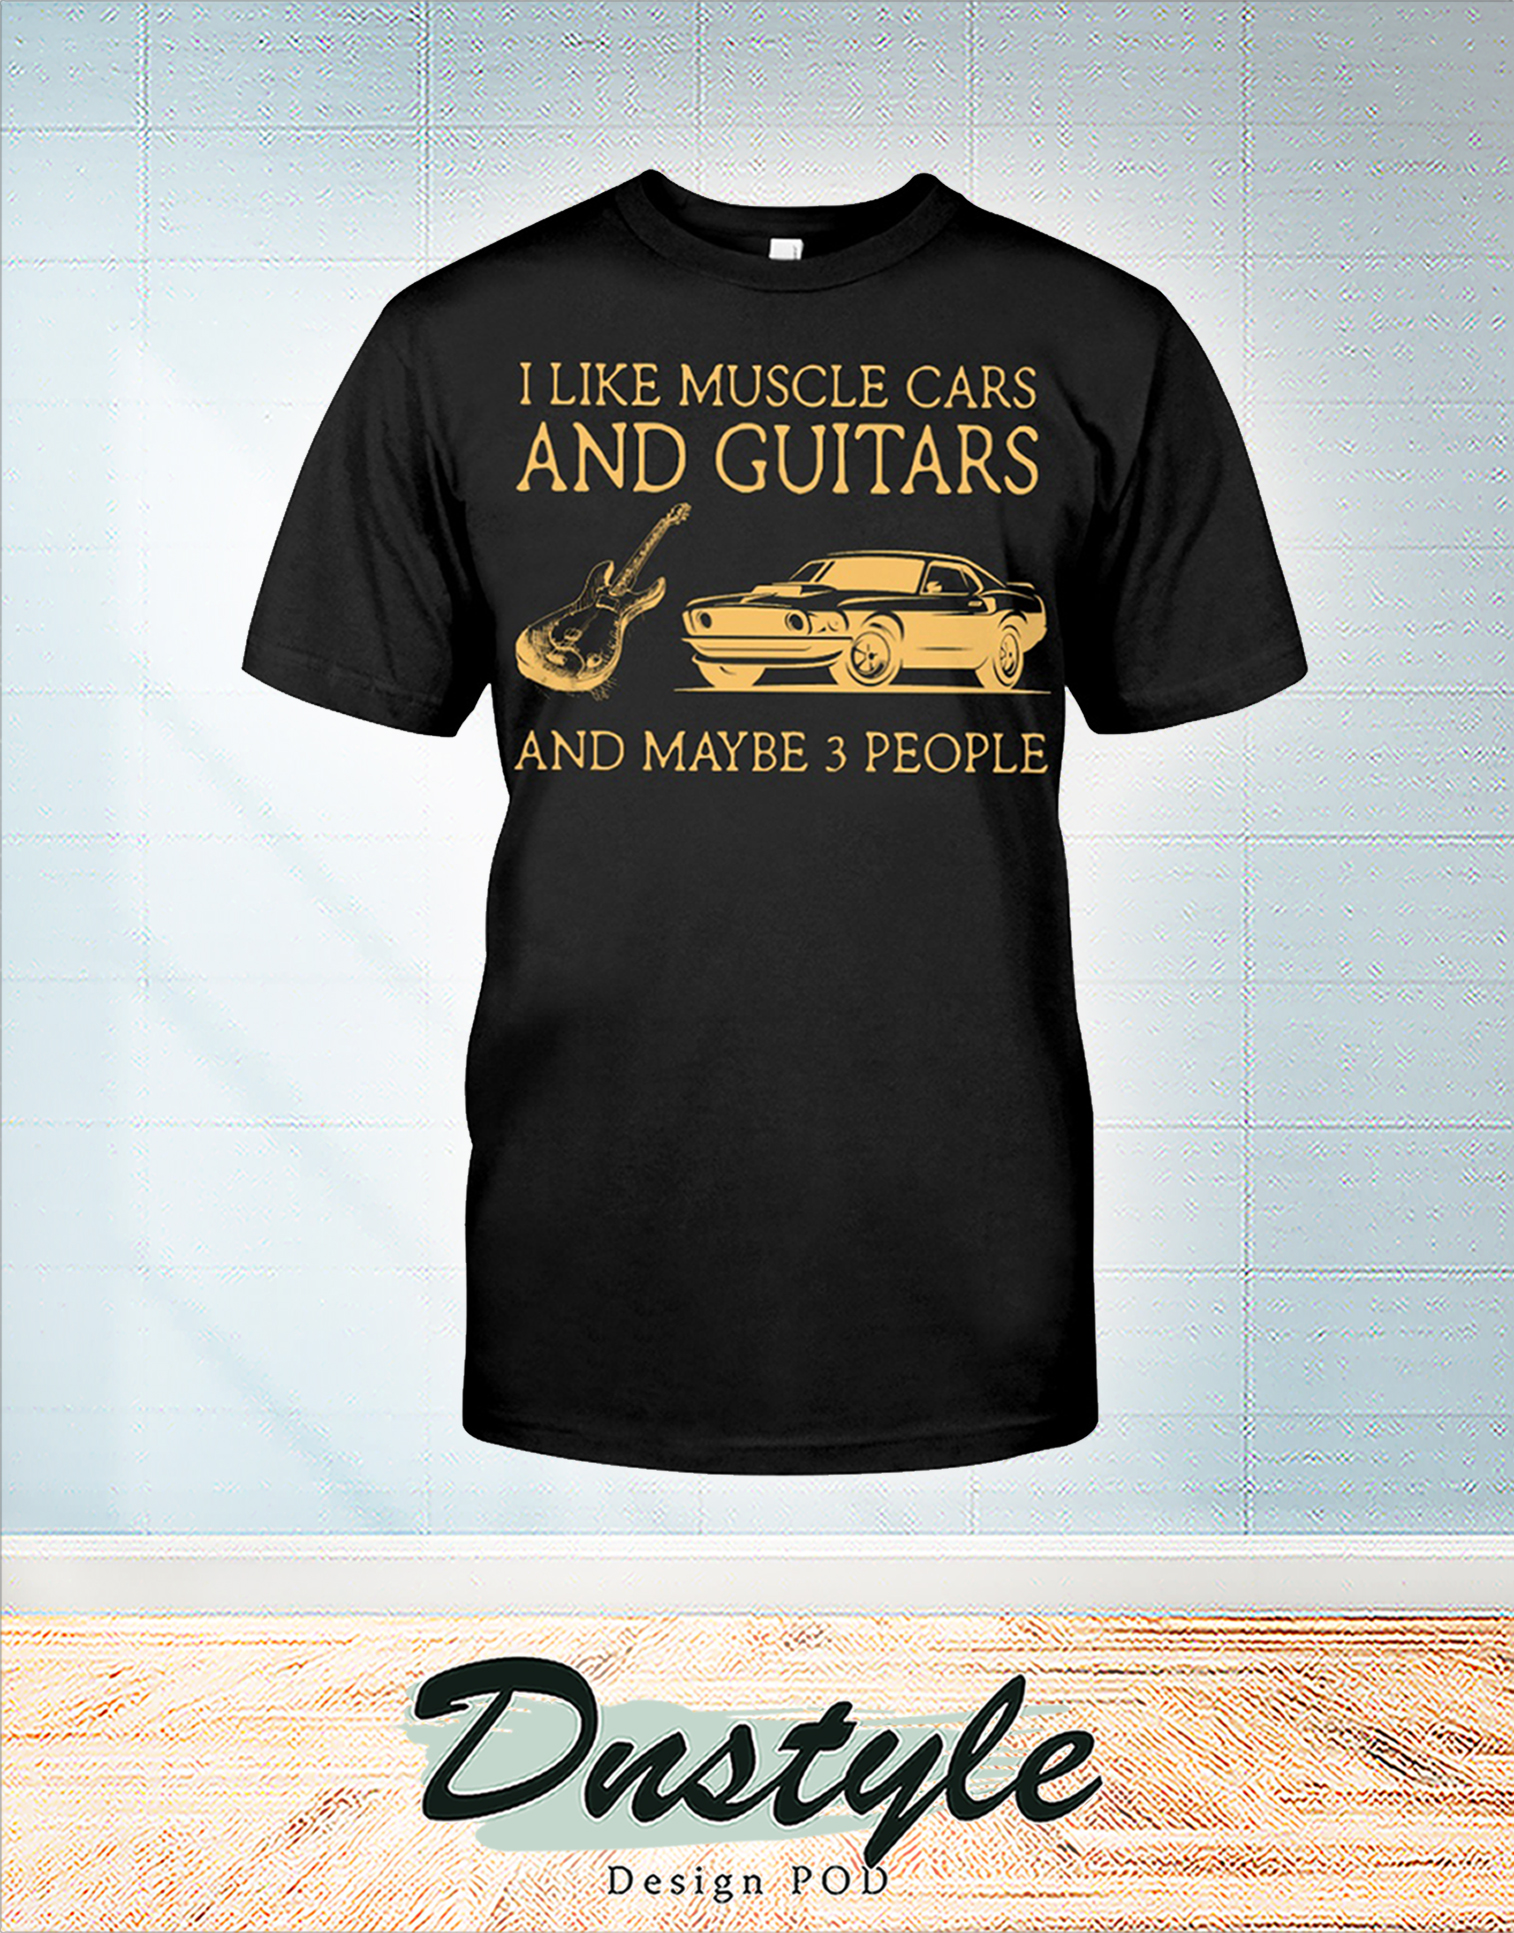 I like muscle cars and guitars and maybe 3 people t-shirt